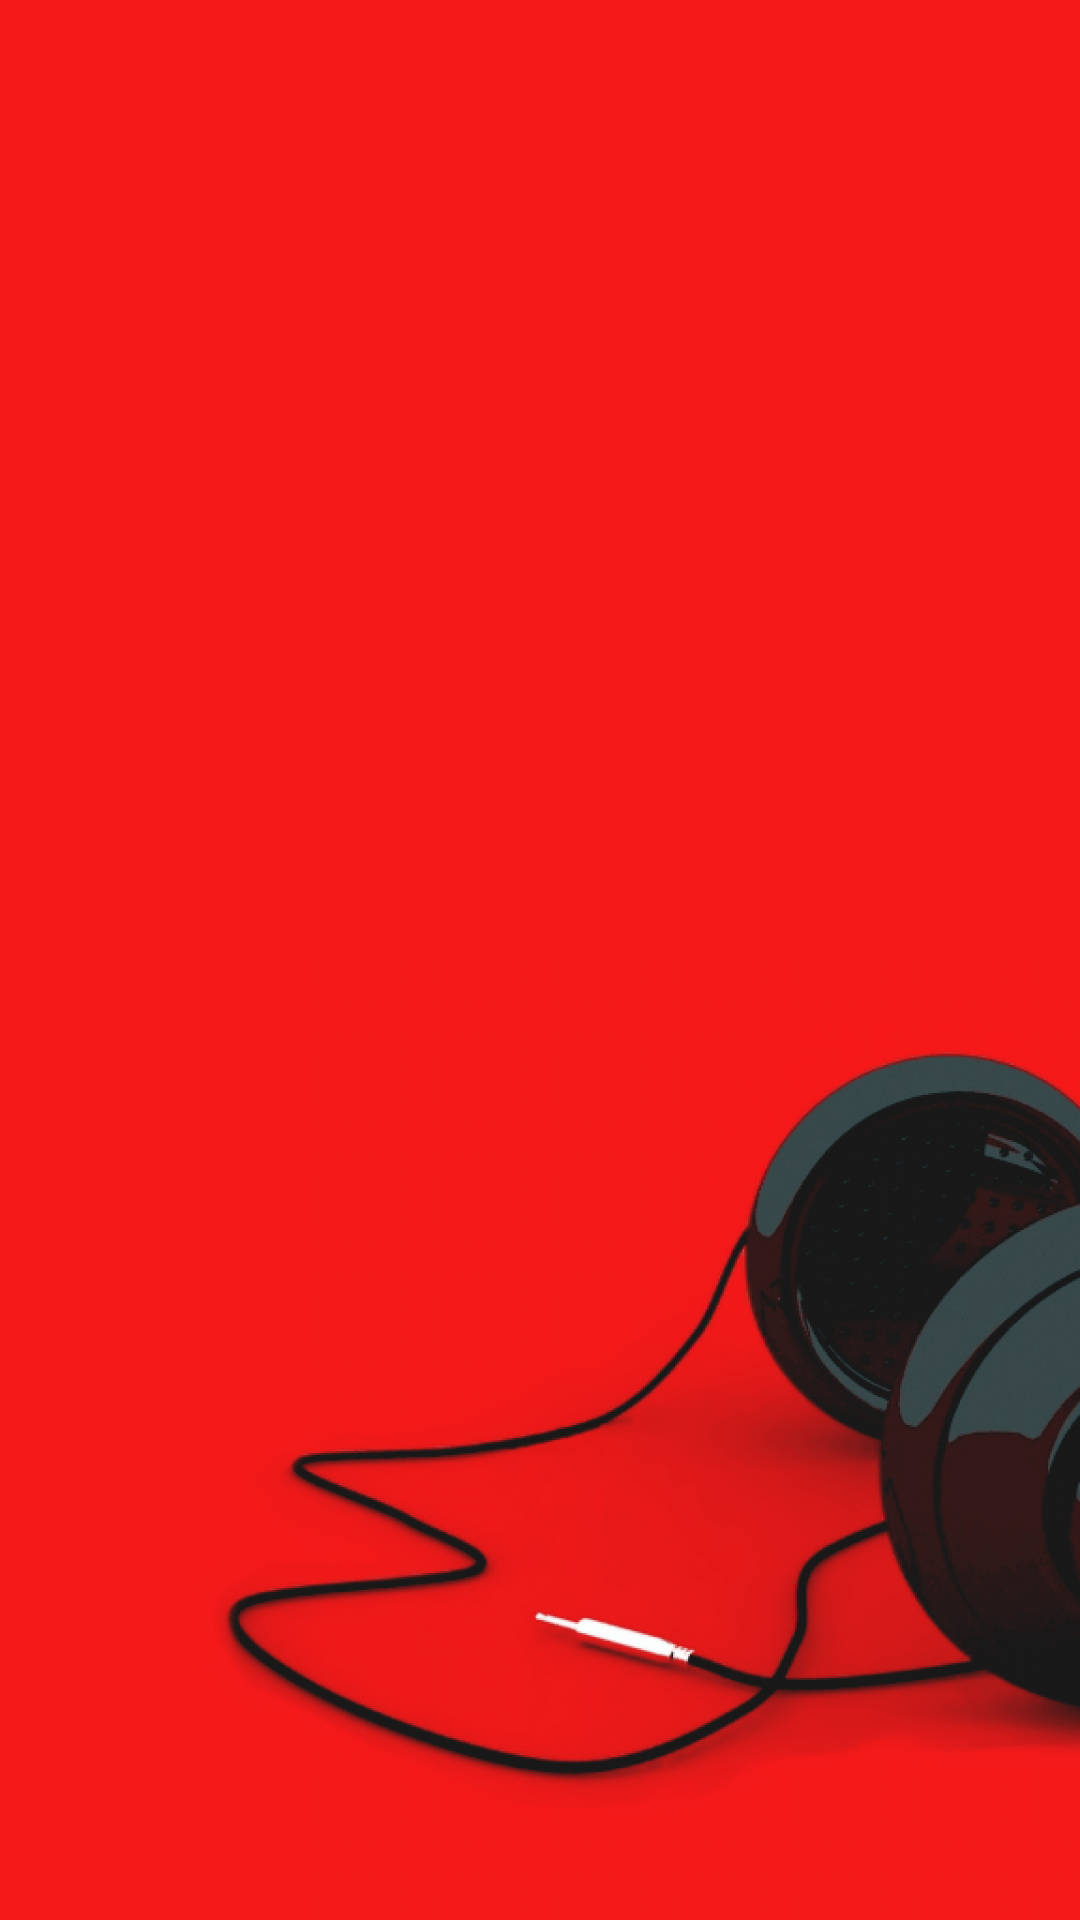 Headset On Red Background Background